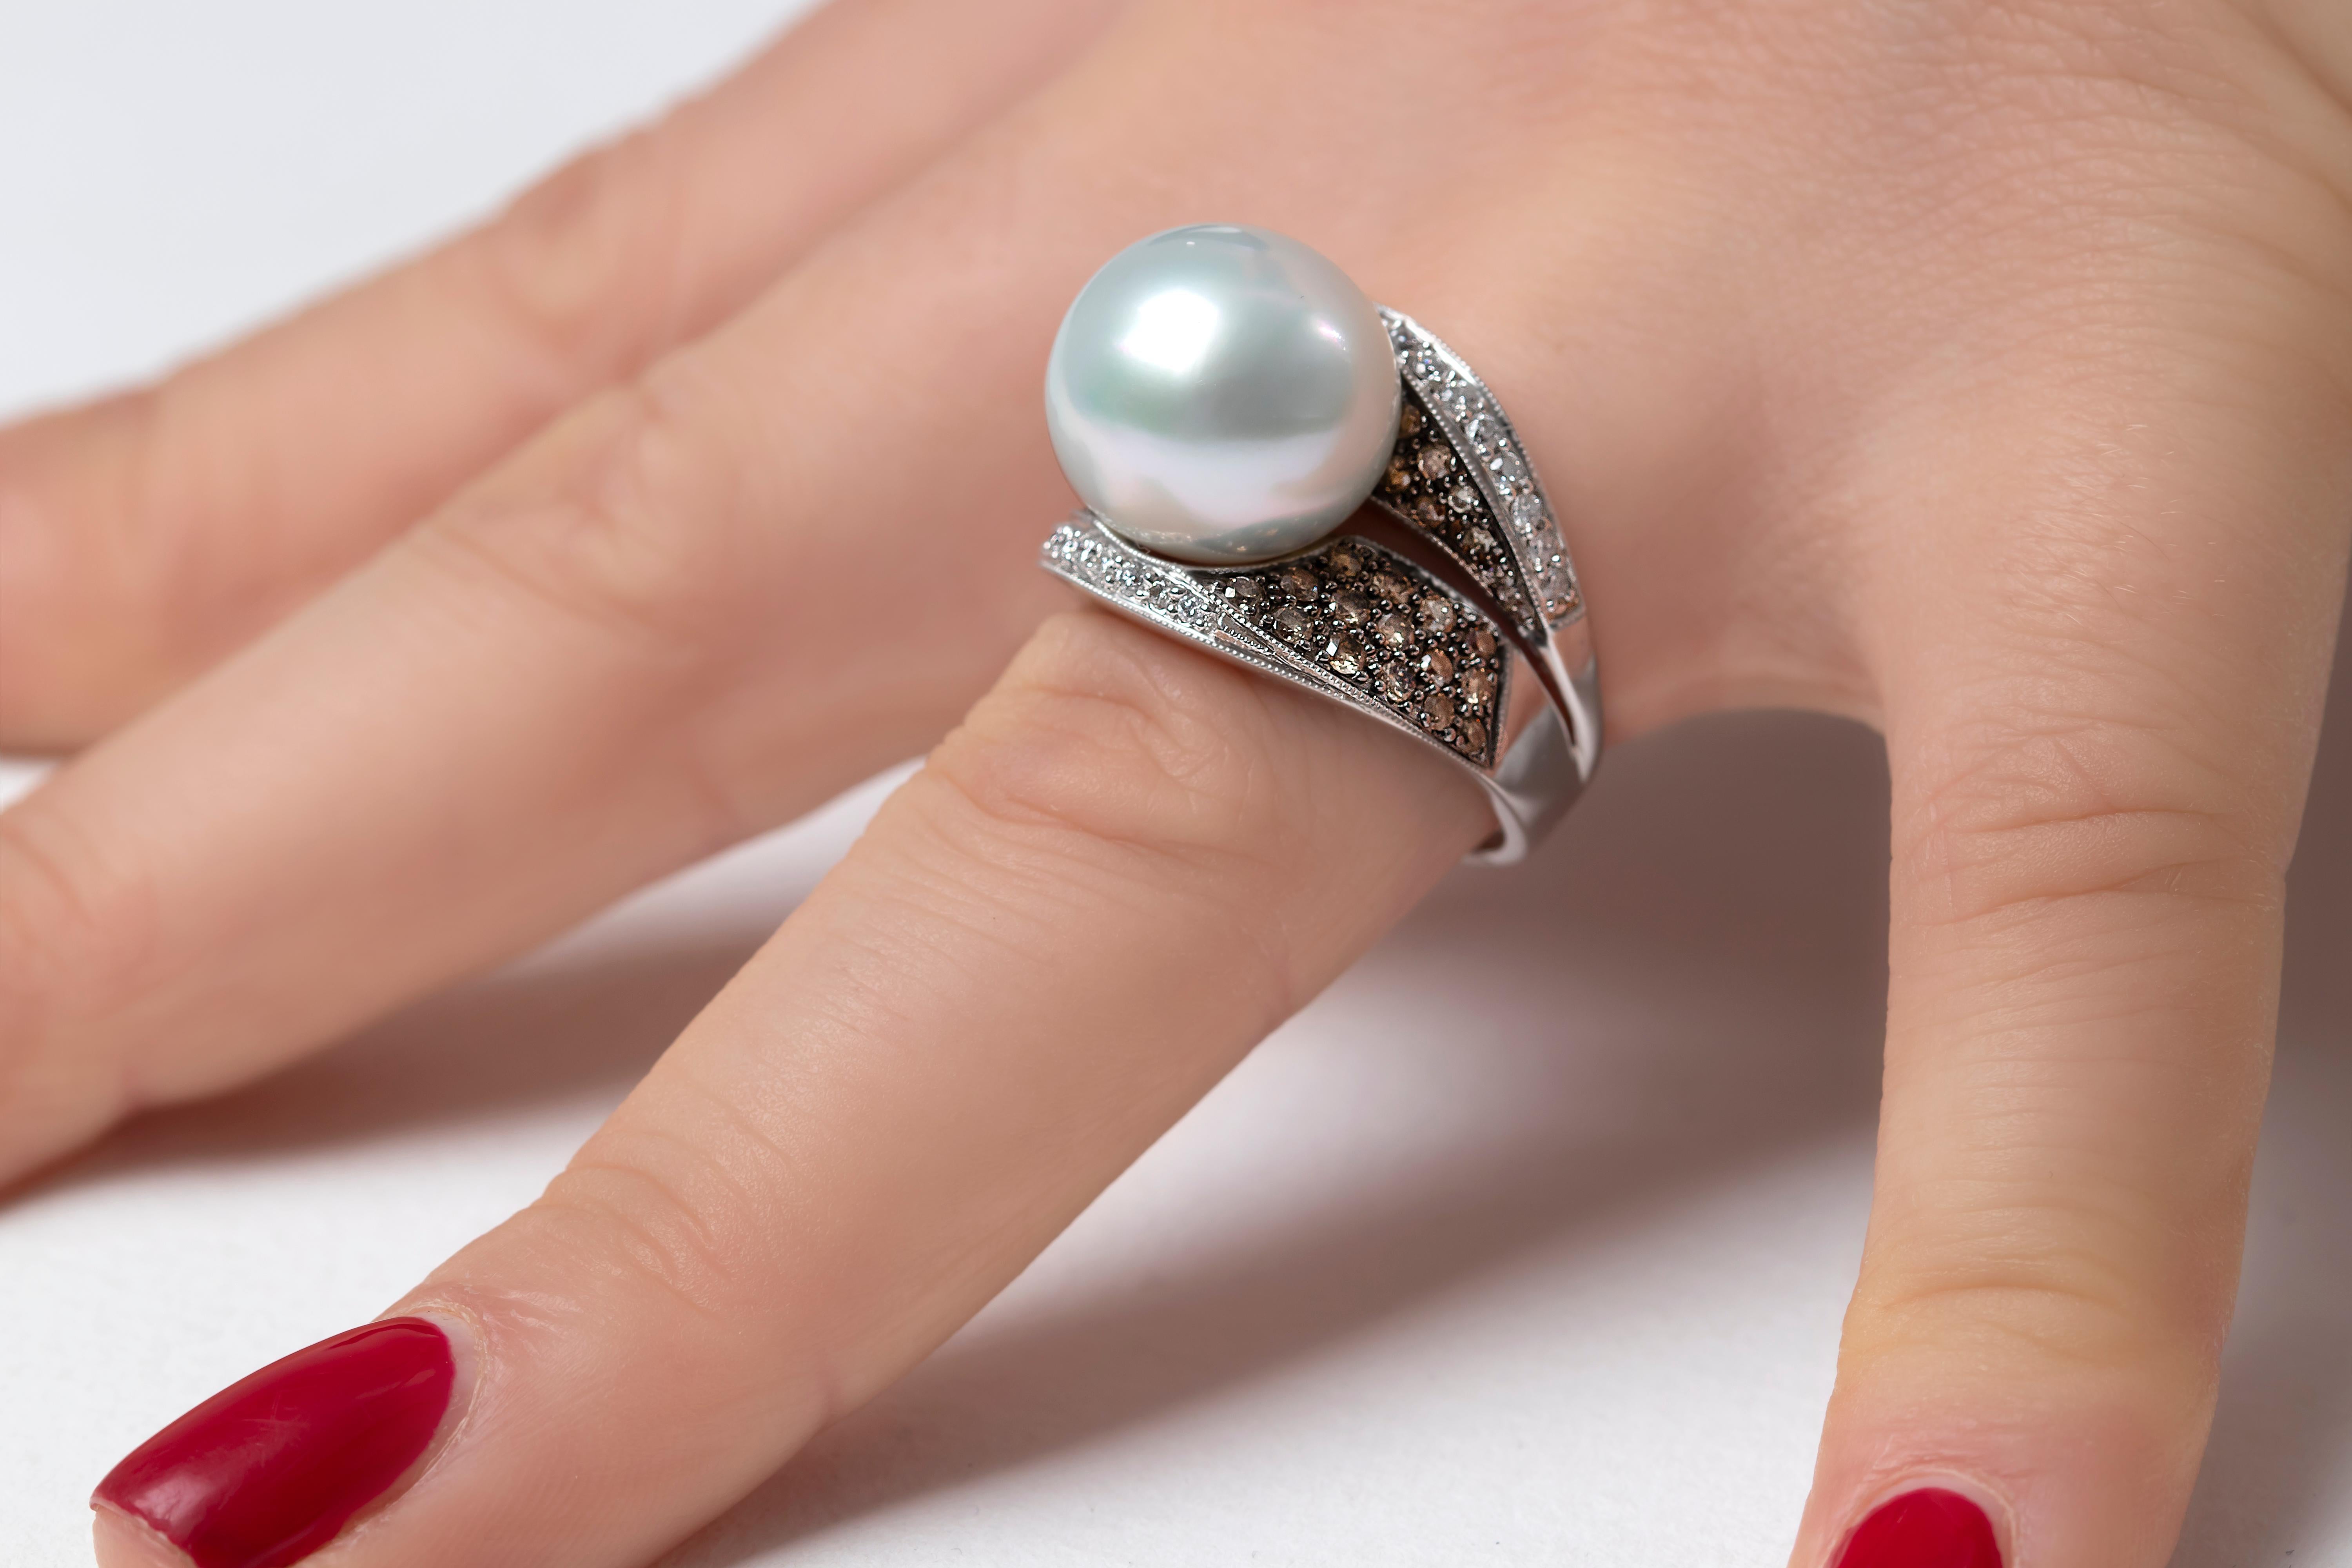 This elegant ring by Yoko London features a lustrous South Sea Pearl, set amongst a scintillating sweep of brown and white diamonds. Bold and striking, this one of a kind ring will add a touch of unique elegance to any formal look. 
-	13-14mm South